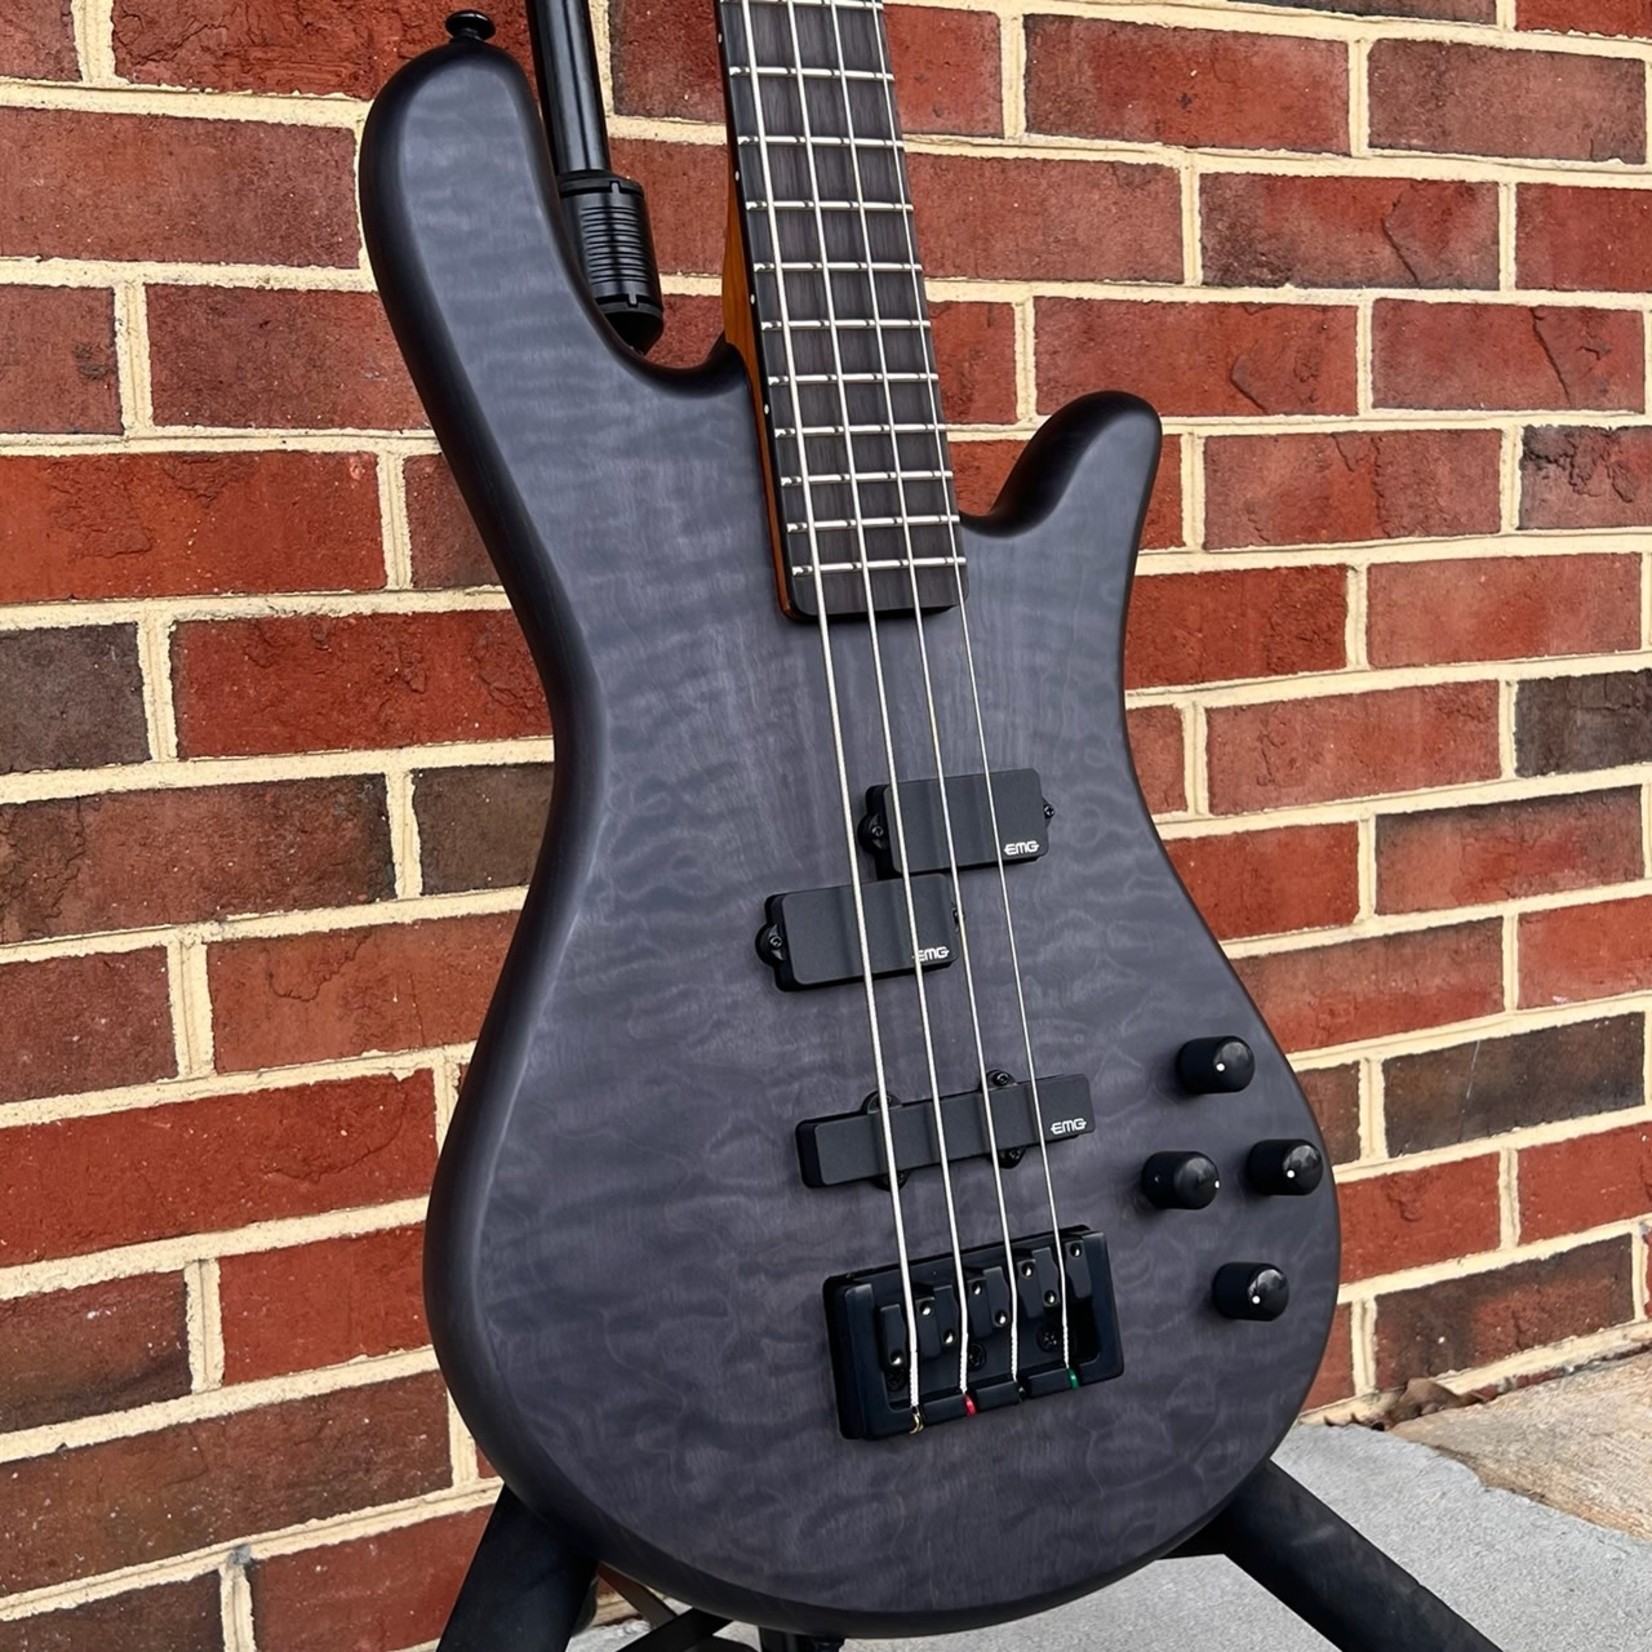 Spector Spector NS Pulse II 4-String, Black Stain Matte, Quilted Maple Top, Swamp Ash Body, Roasted Maple Neck, Macassar Ebony Fretboard, Gig Bag, SN# W211458